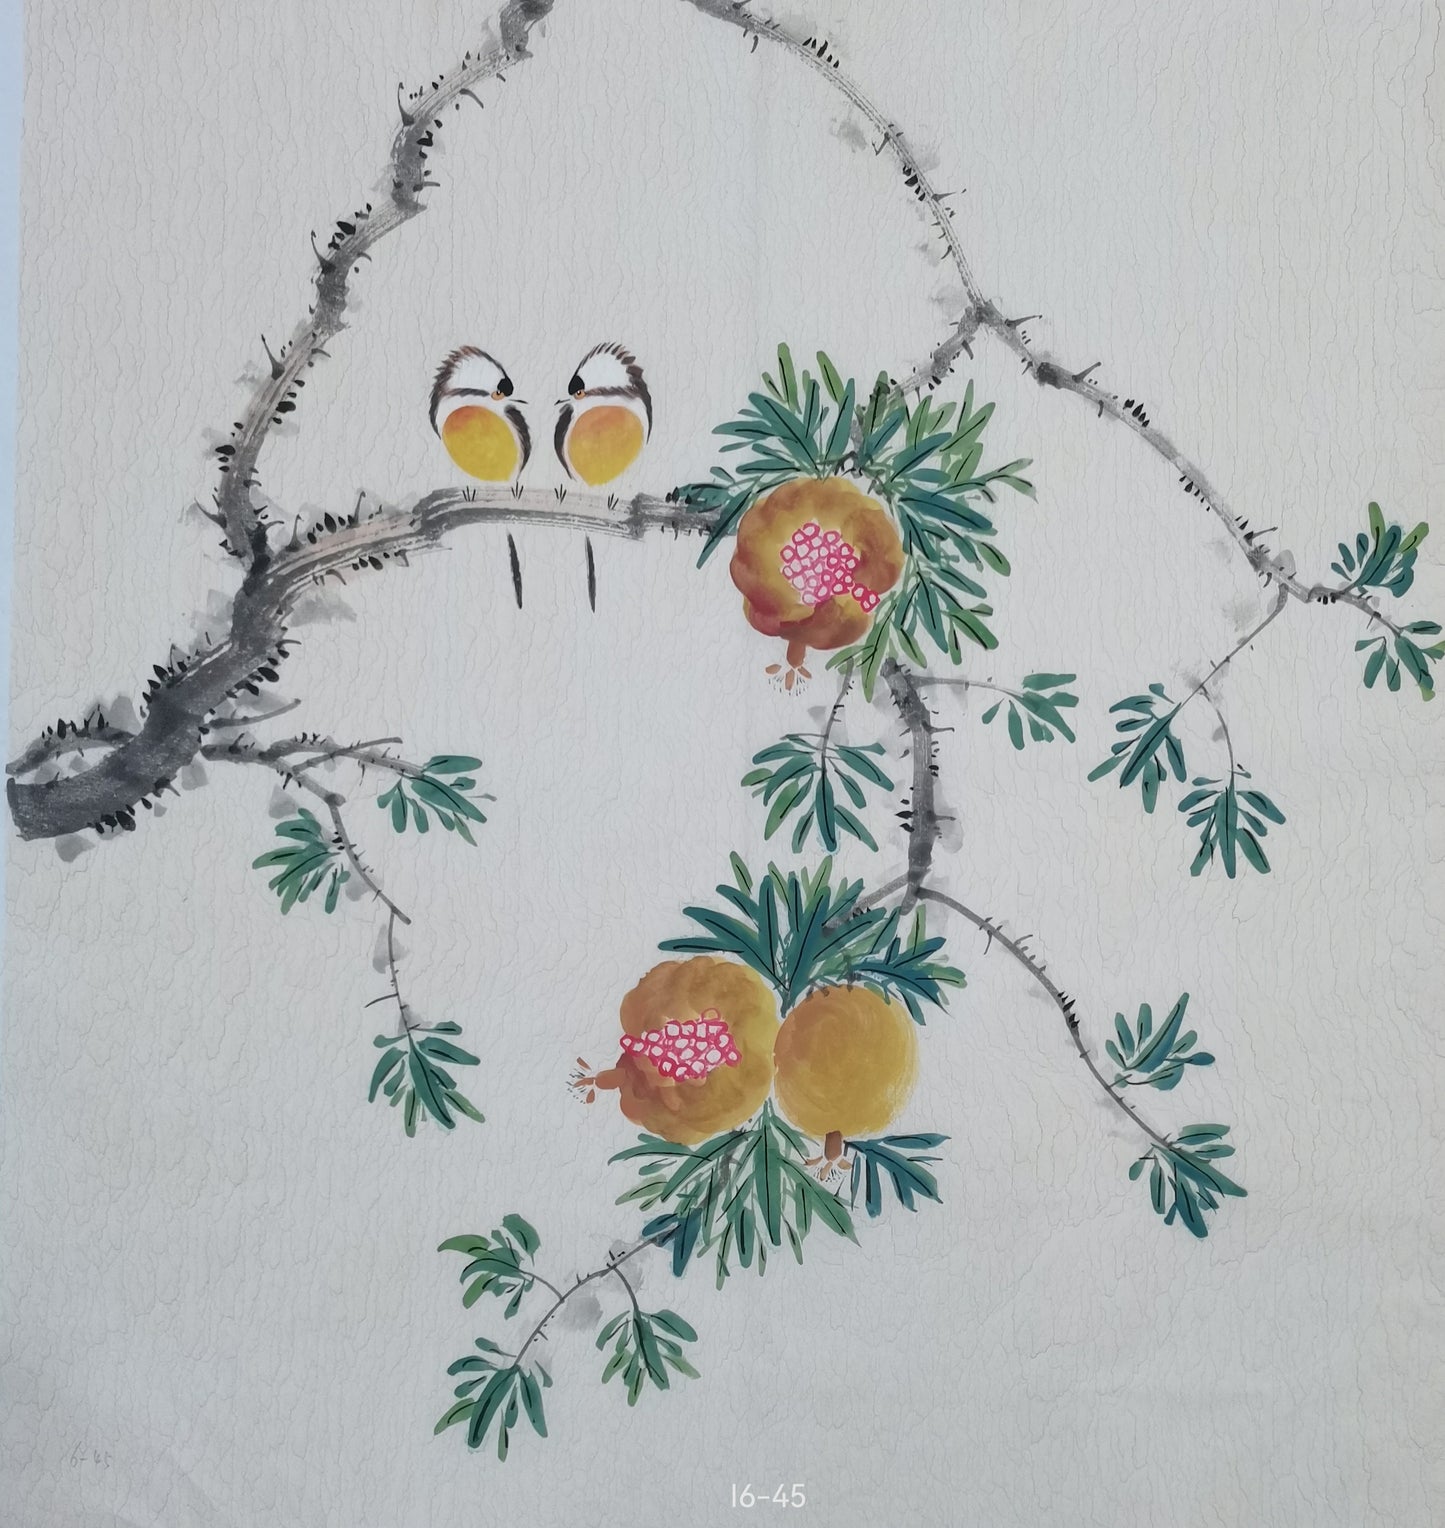 Chinese painting-plant. Pomegranate and birds. Study decoration